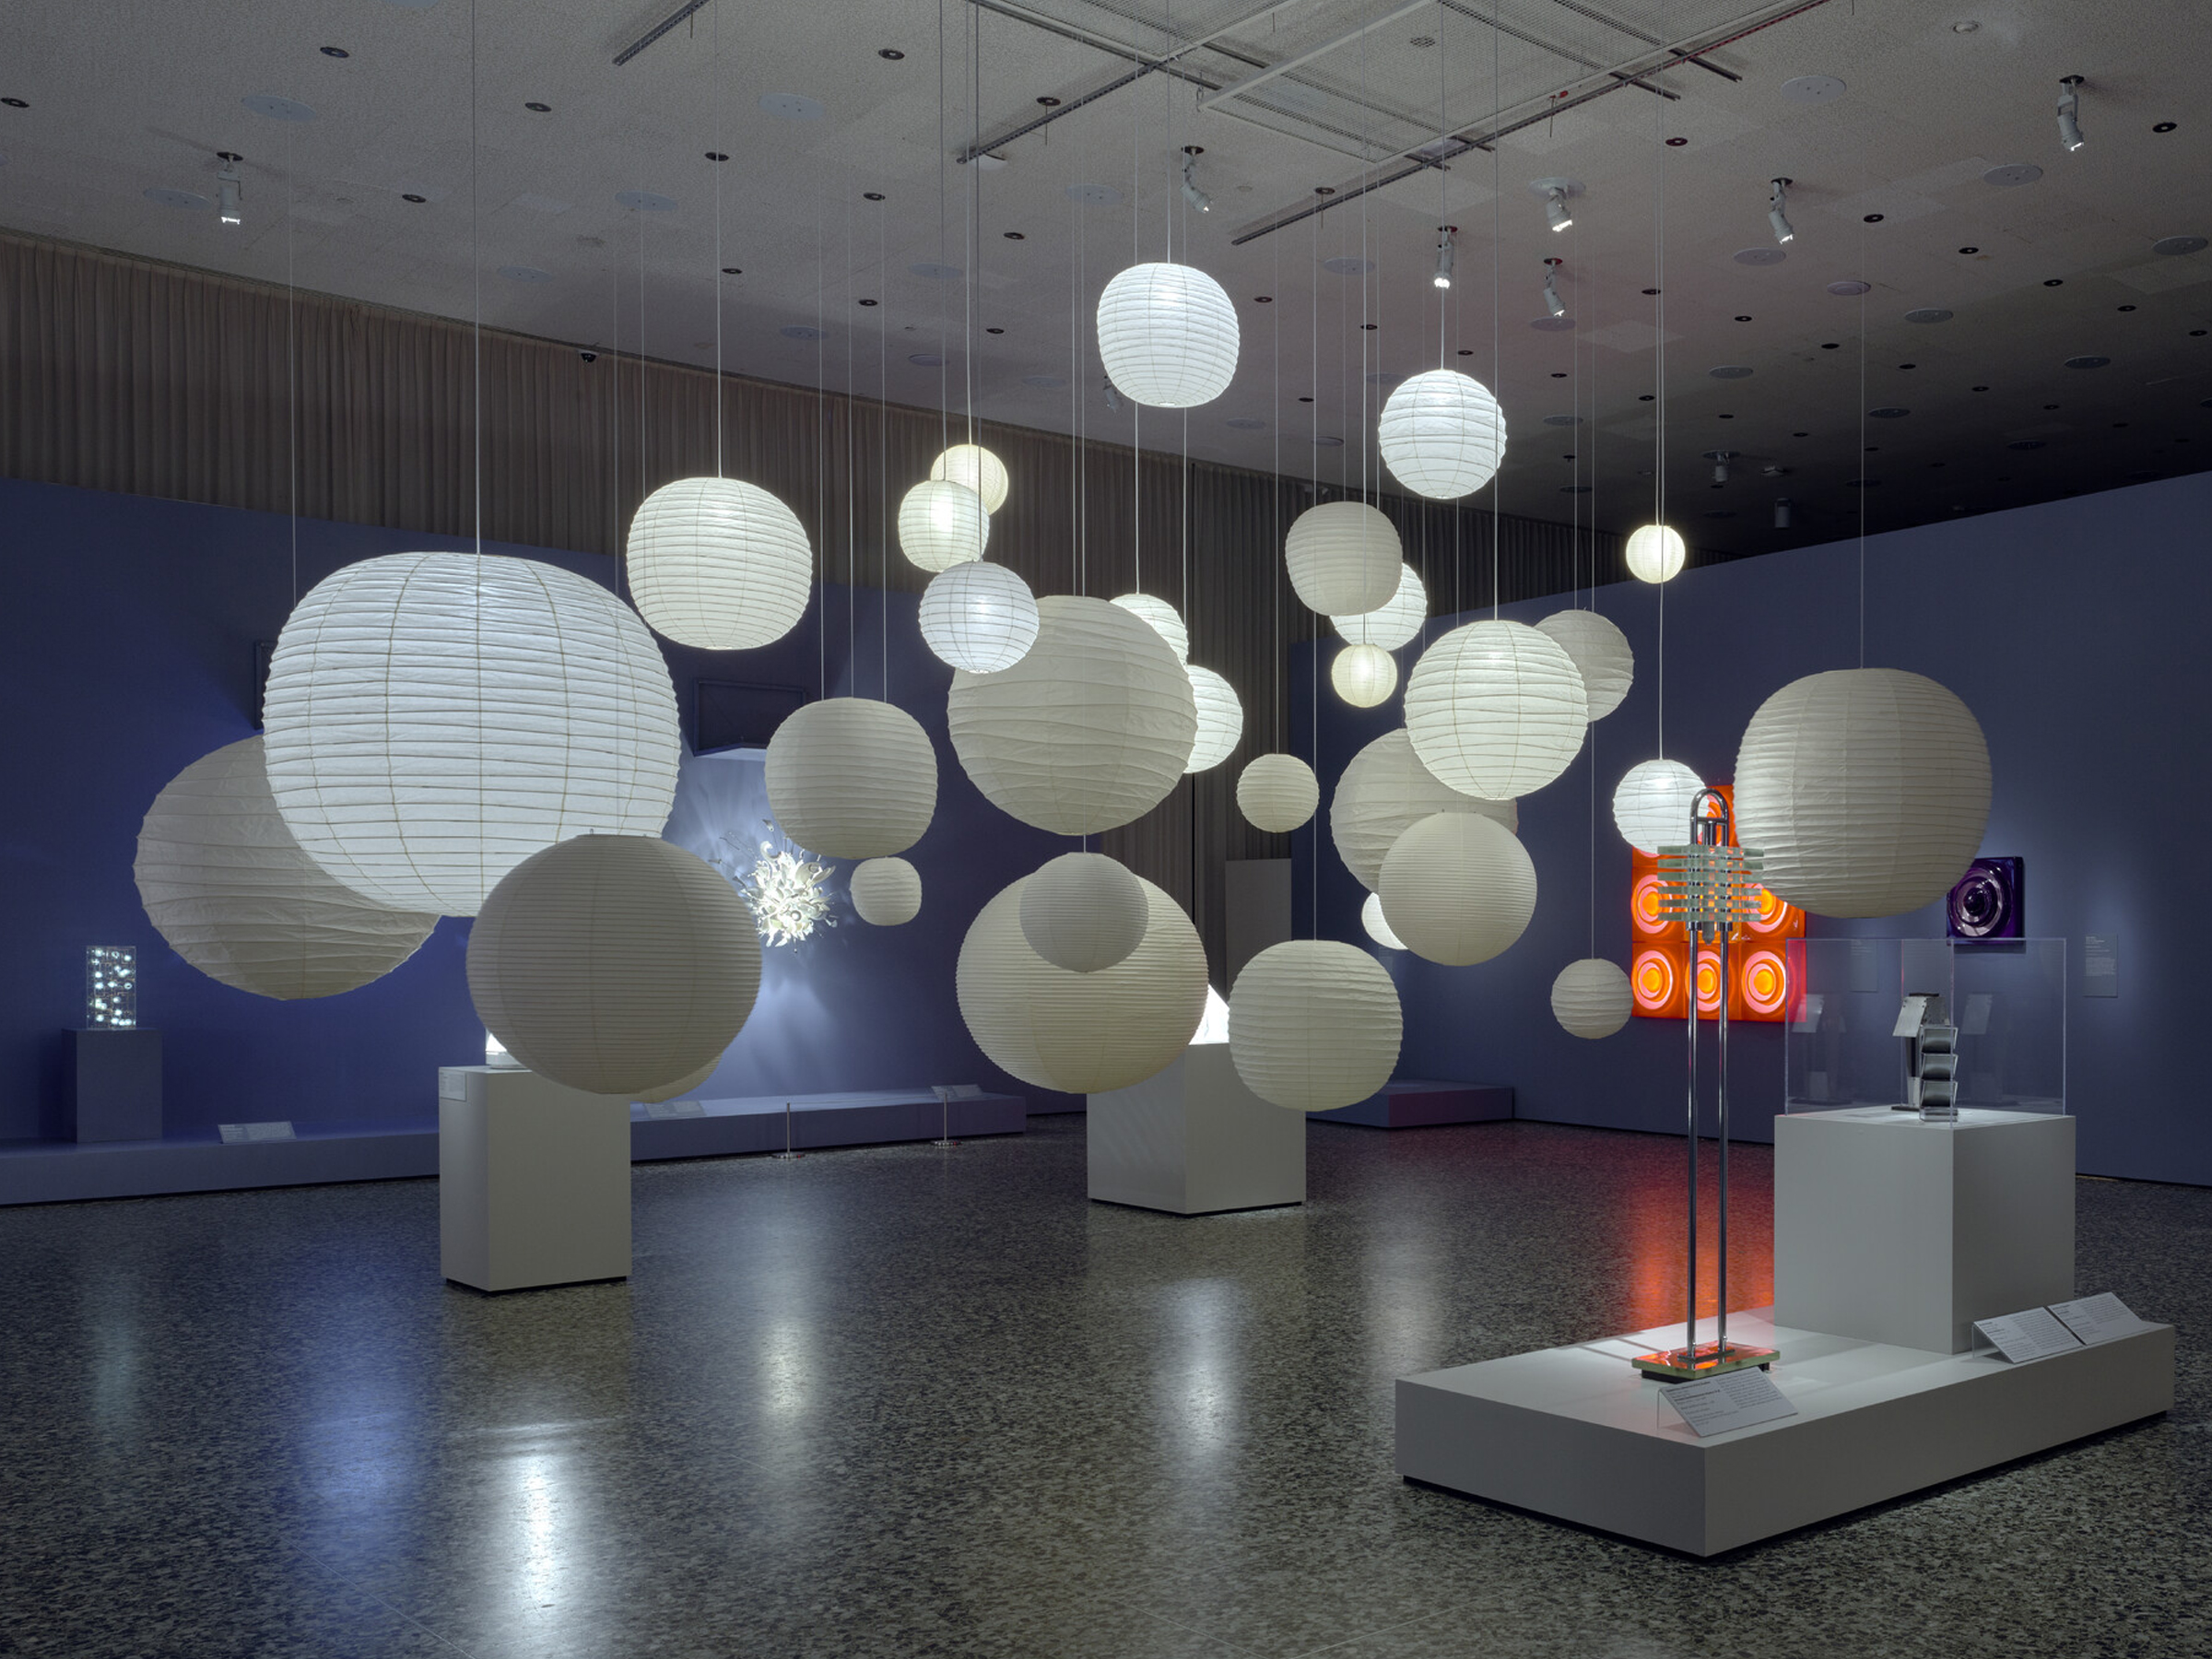 Isamu Noguchi's Akari lamps from "Electrifying Design: A Century of Lighting," at the Museum of Fine Arts, Houston